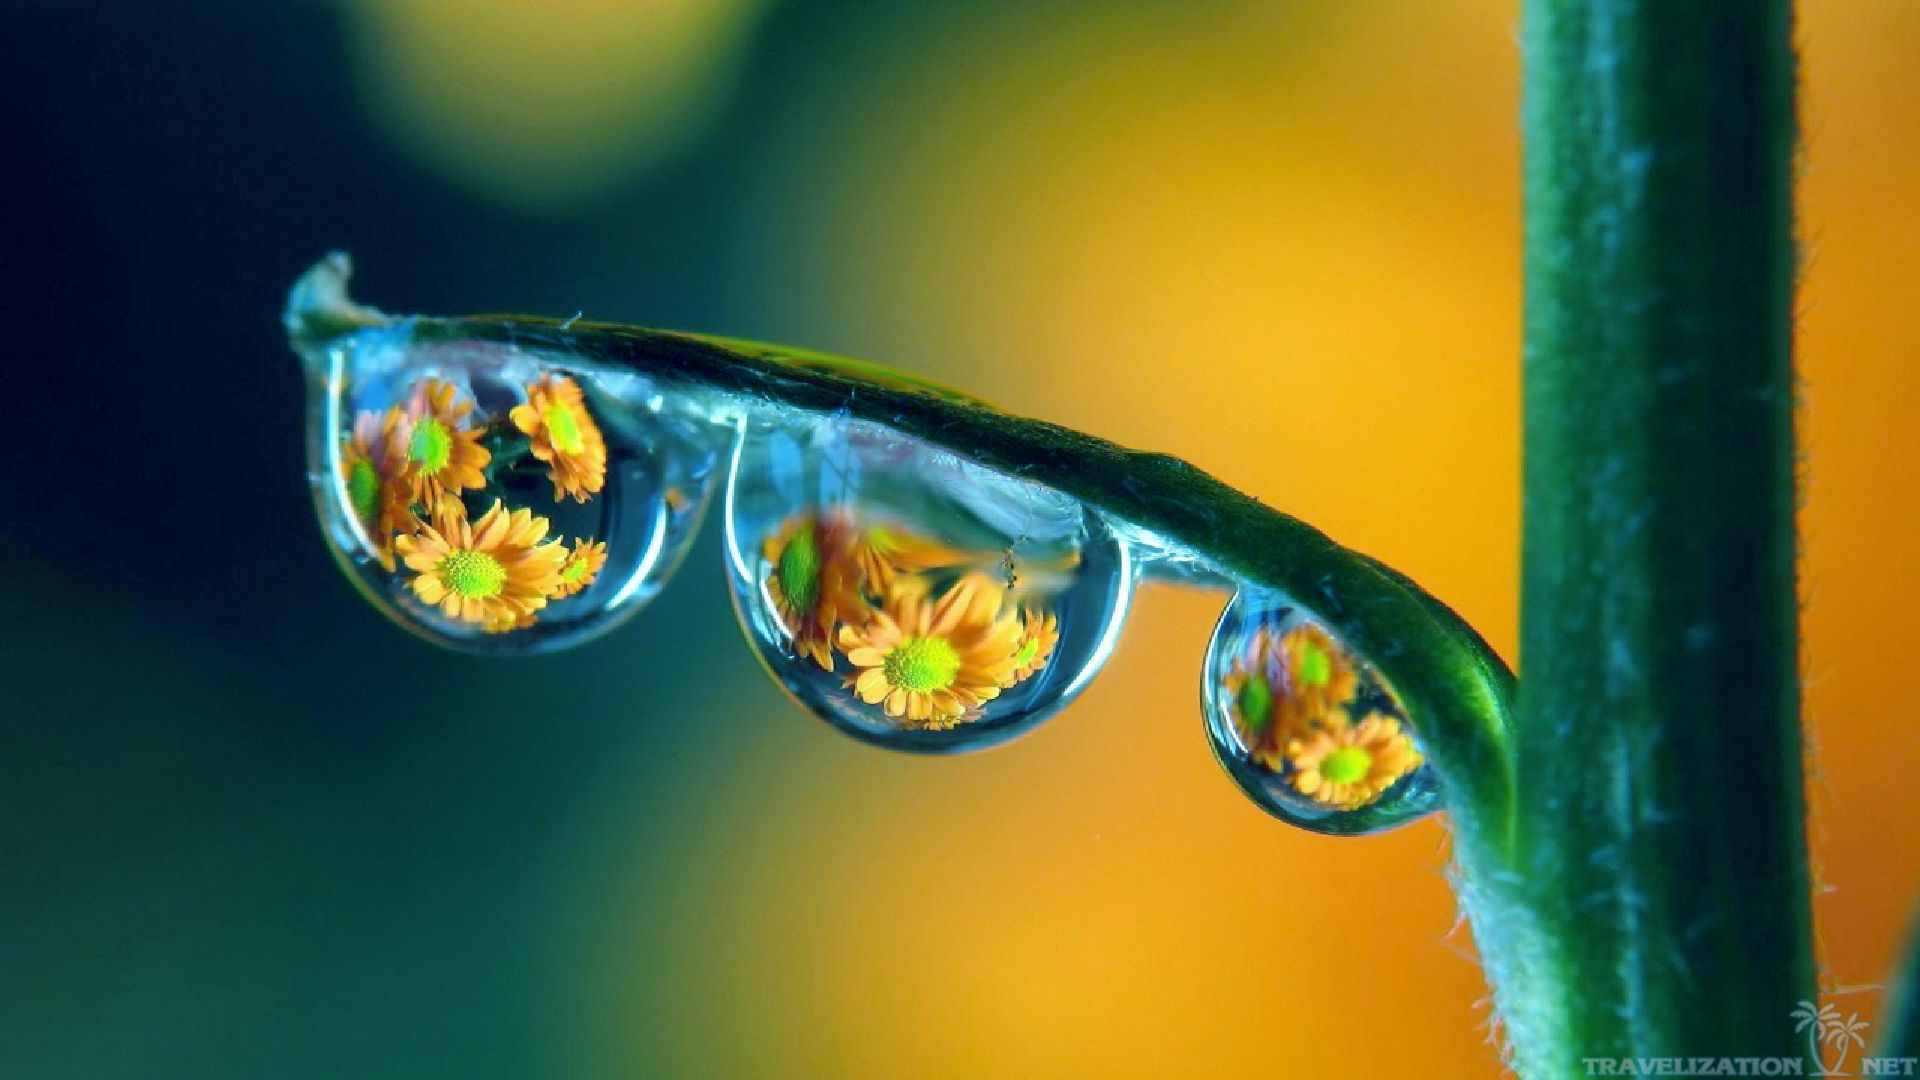 You can find Amazing Three Drop On Plant Natural wallpapers in many resolution such as 1024×768, 1280×1024, 1366×768, ...